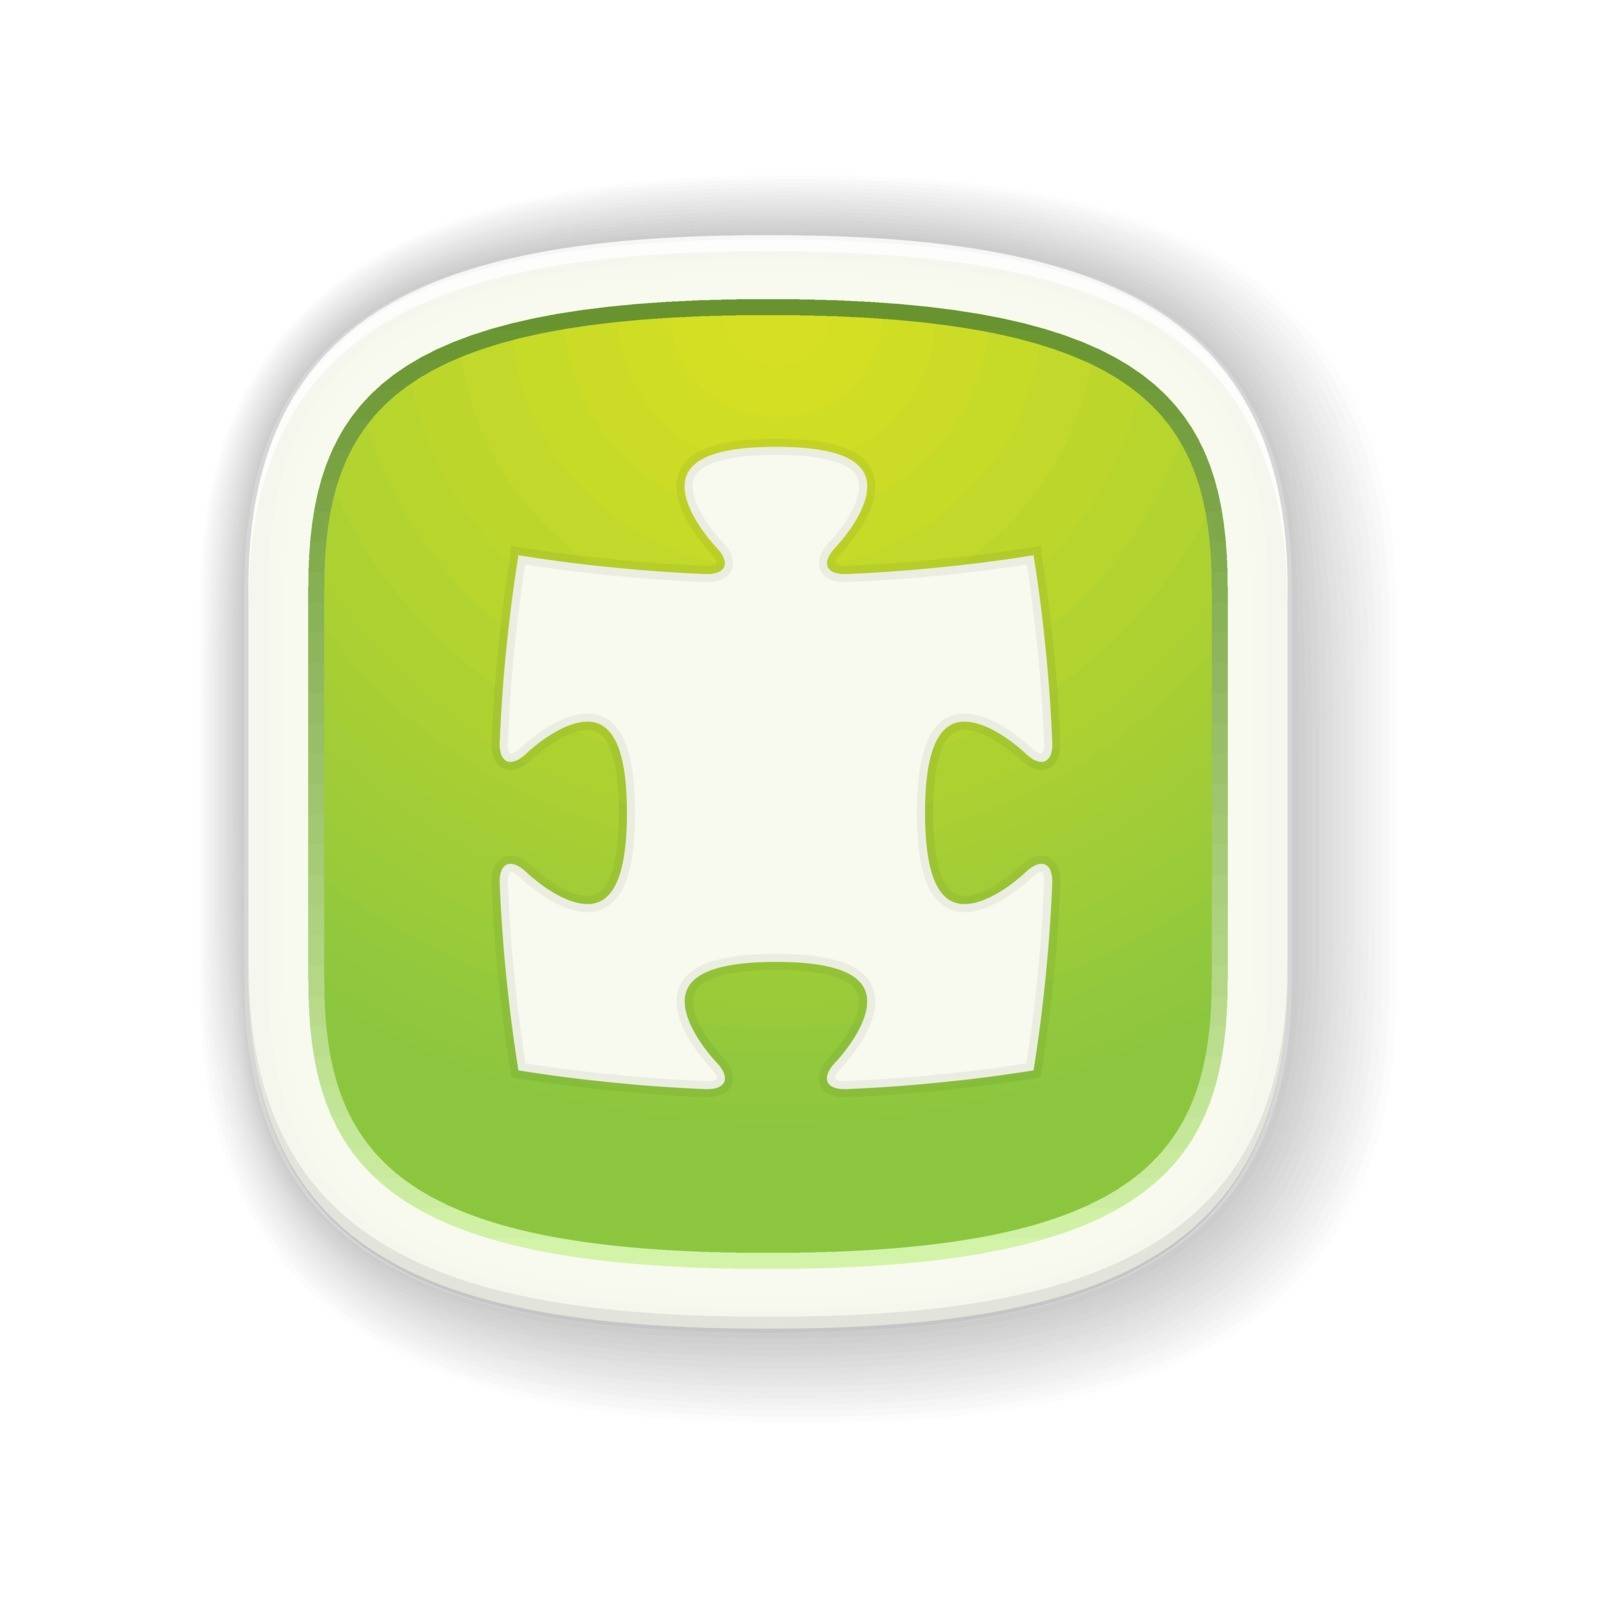 the puzzle icon by madtom